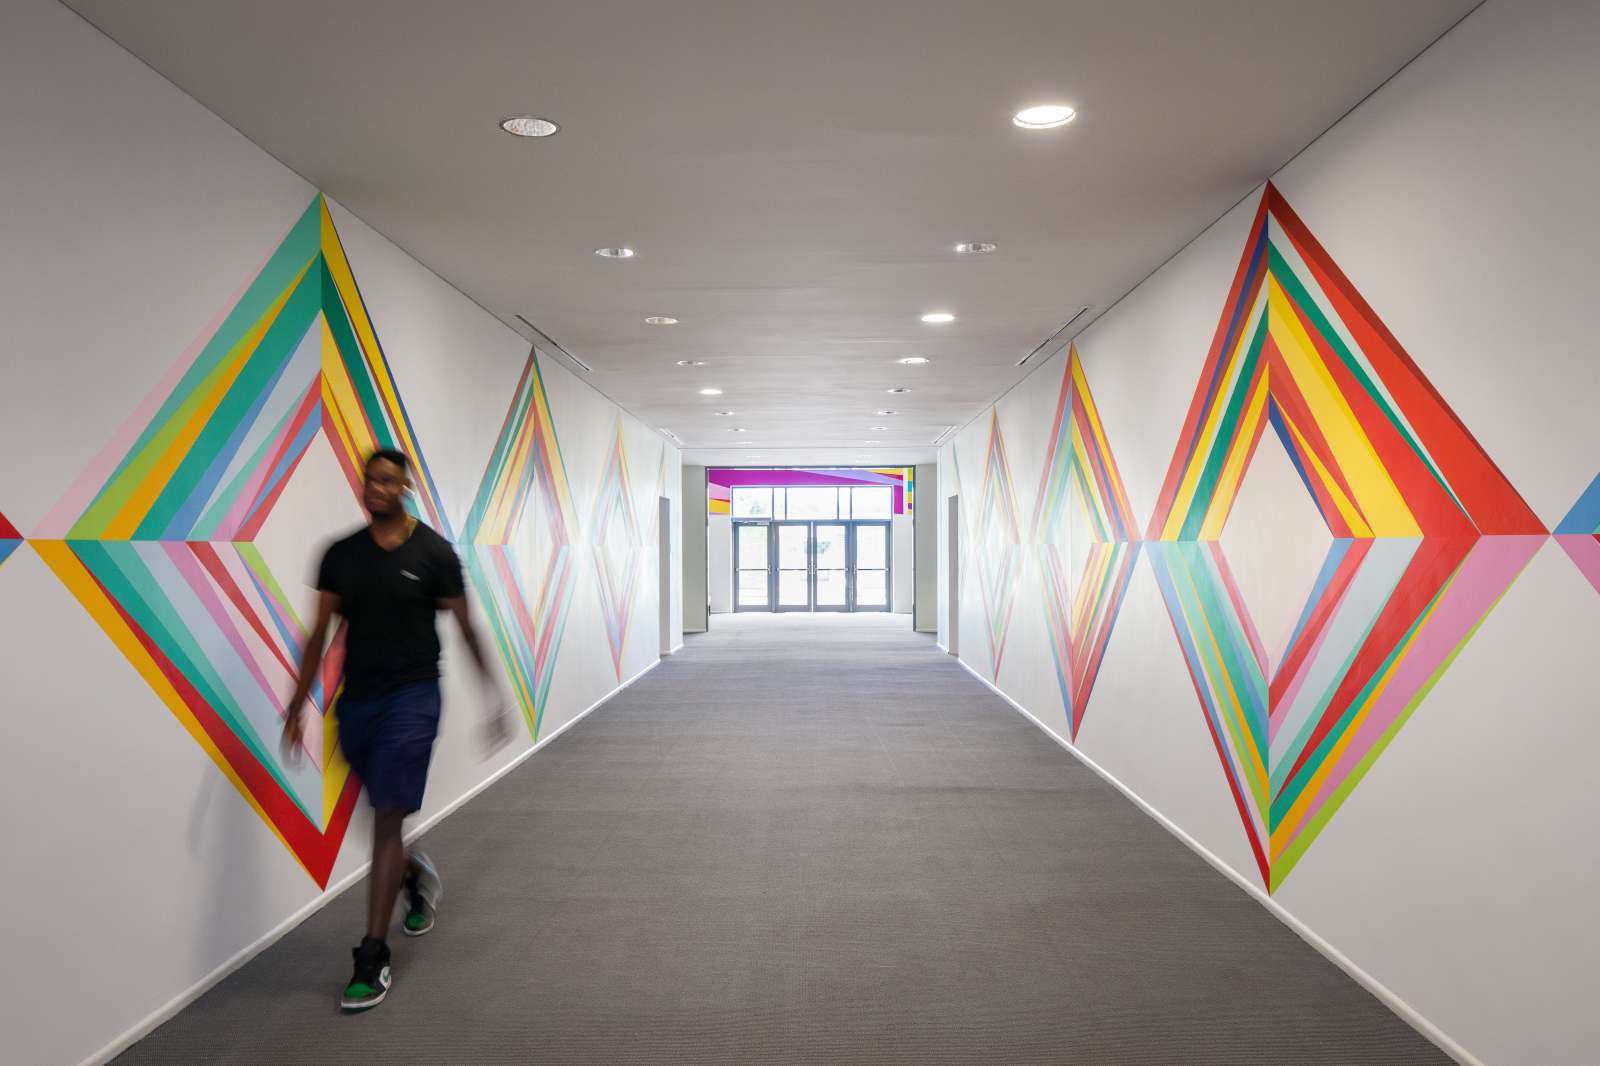 Odili Donald Odita Meeting Place / Painting with Changing Parts, 2022. Photo by Sean Fleming.